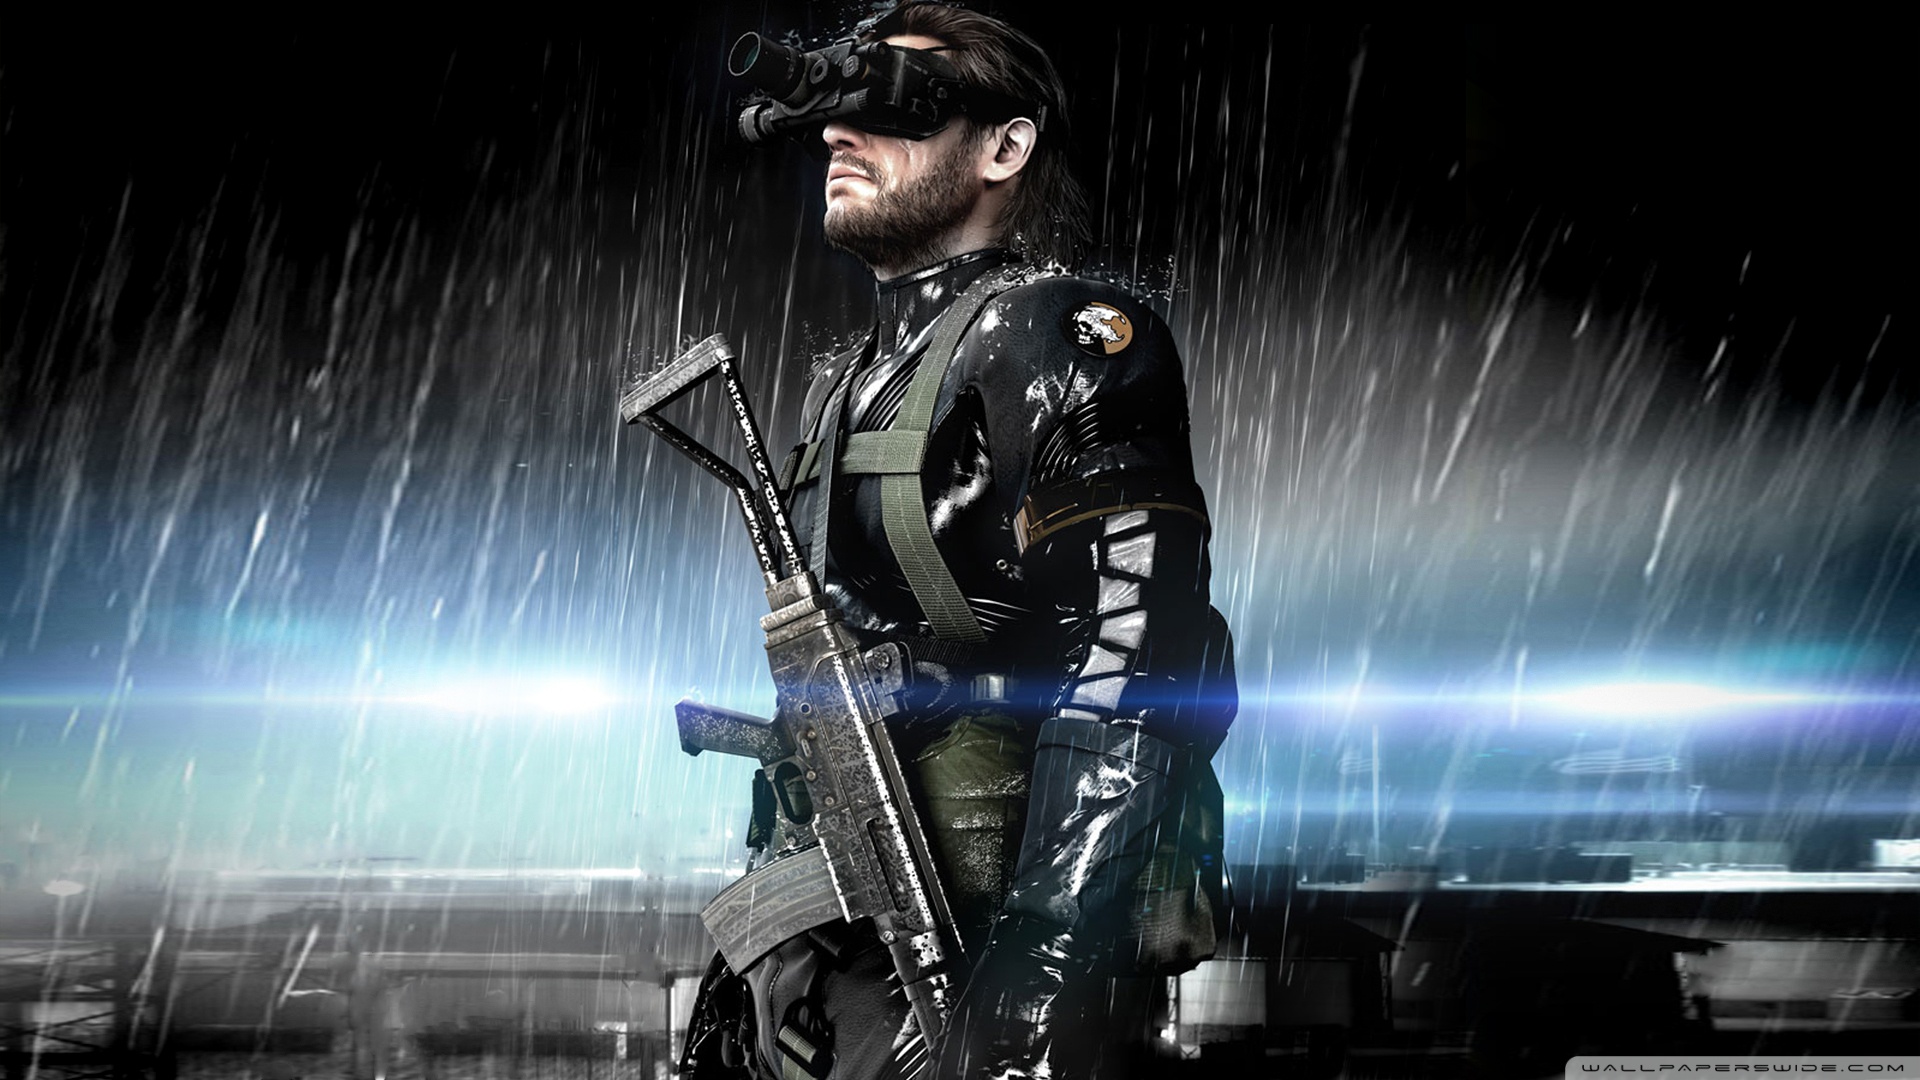 Free Download Metal Gear Solid Ground Zeroes Wallpaper 19x1080 Metal Gear Solid 19x1080 For Your Desktop Mobile Tablet Explore 49 Mgs V Wallpaper Metal Gear Solid Desktop Wallpaper Mgsv